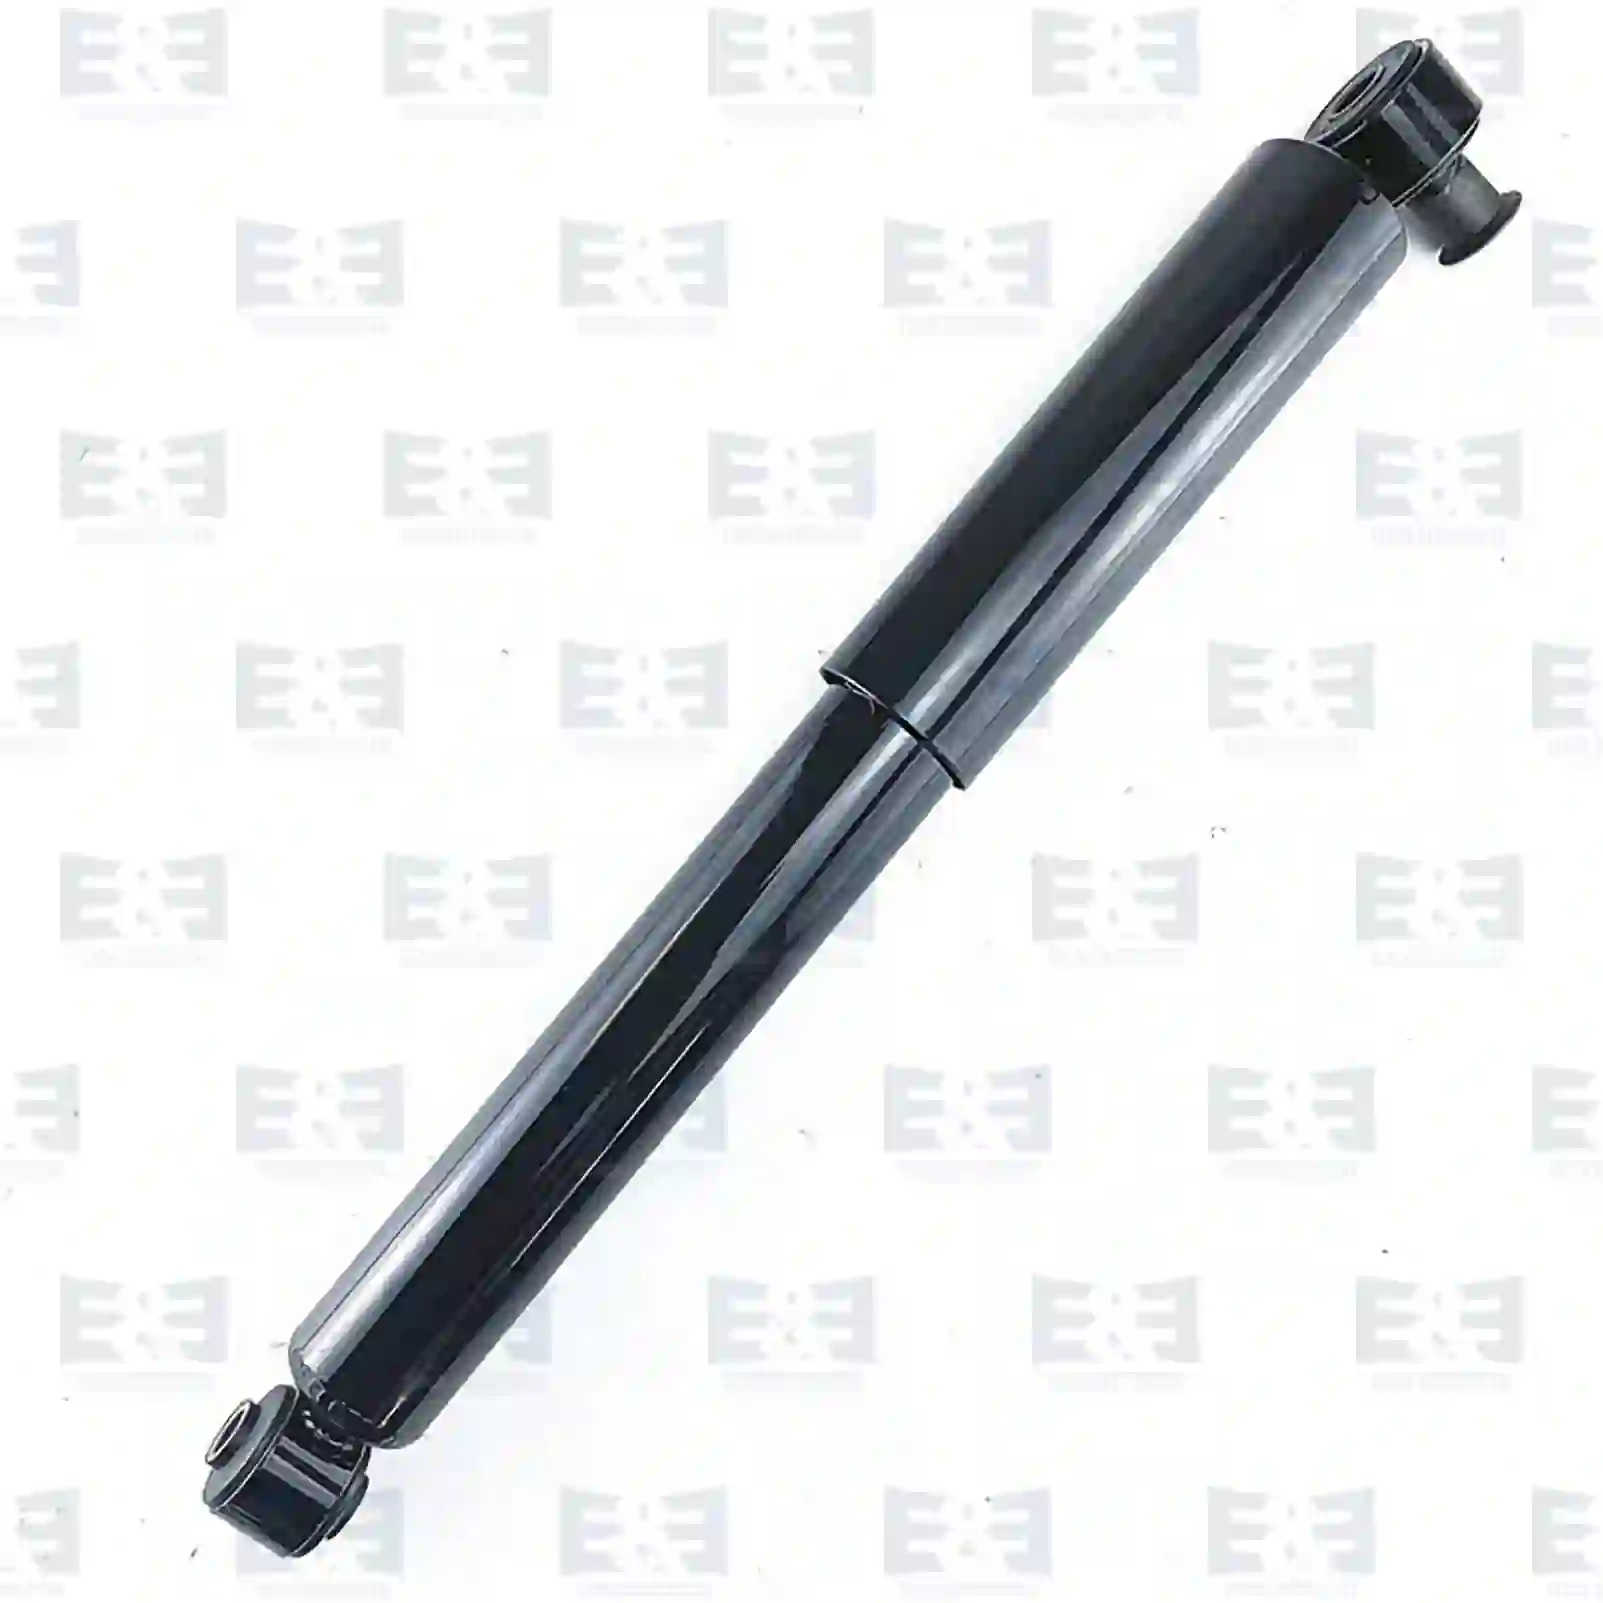  Shock absorber, rear || E&E Truck Spare Parts | Truck Spare Parts, Auotomotive Spare Parts